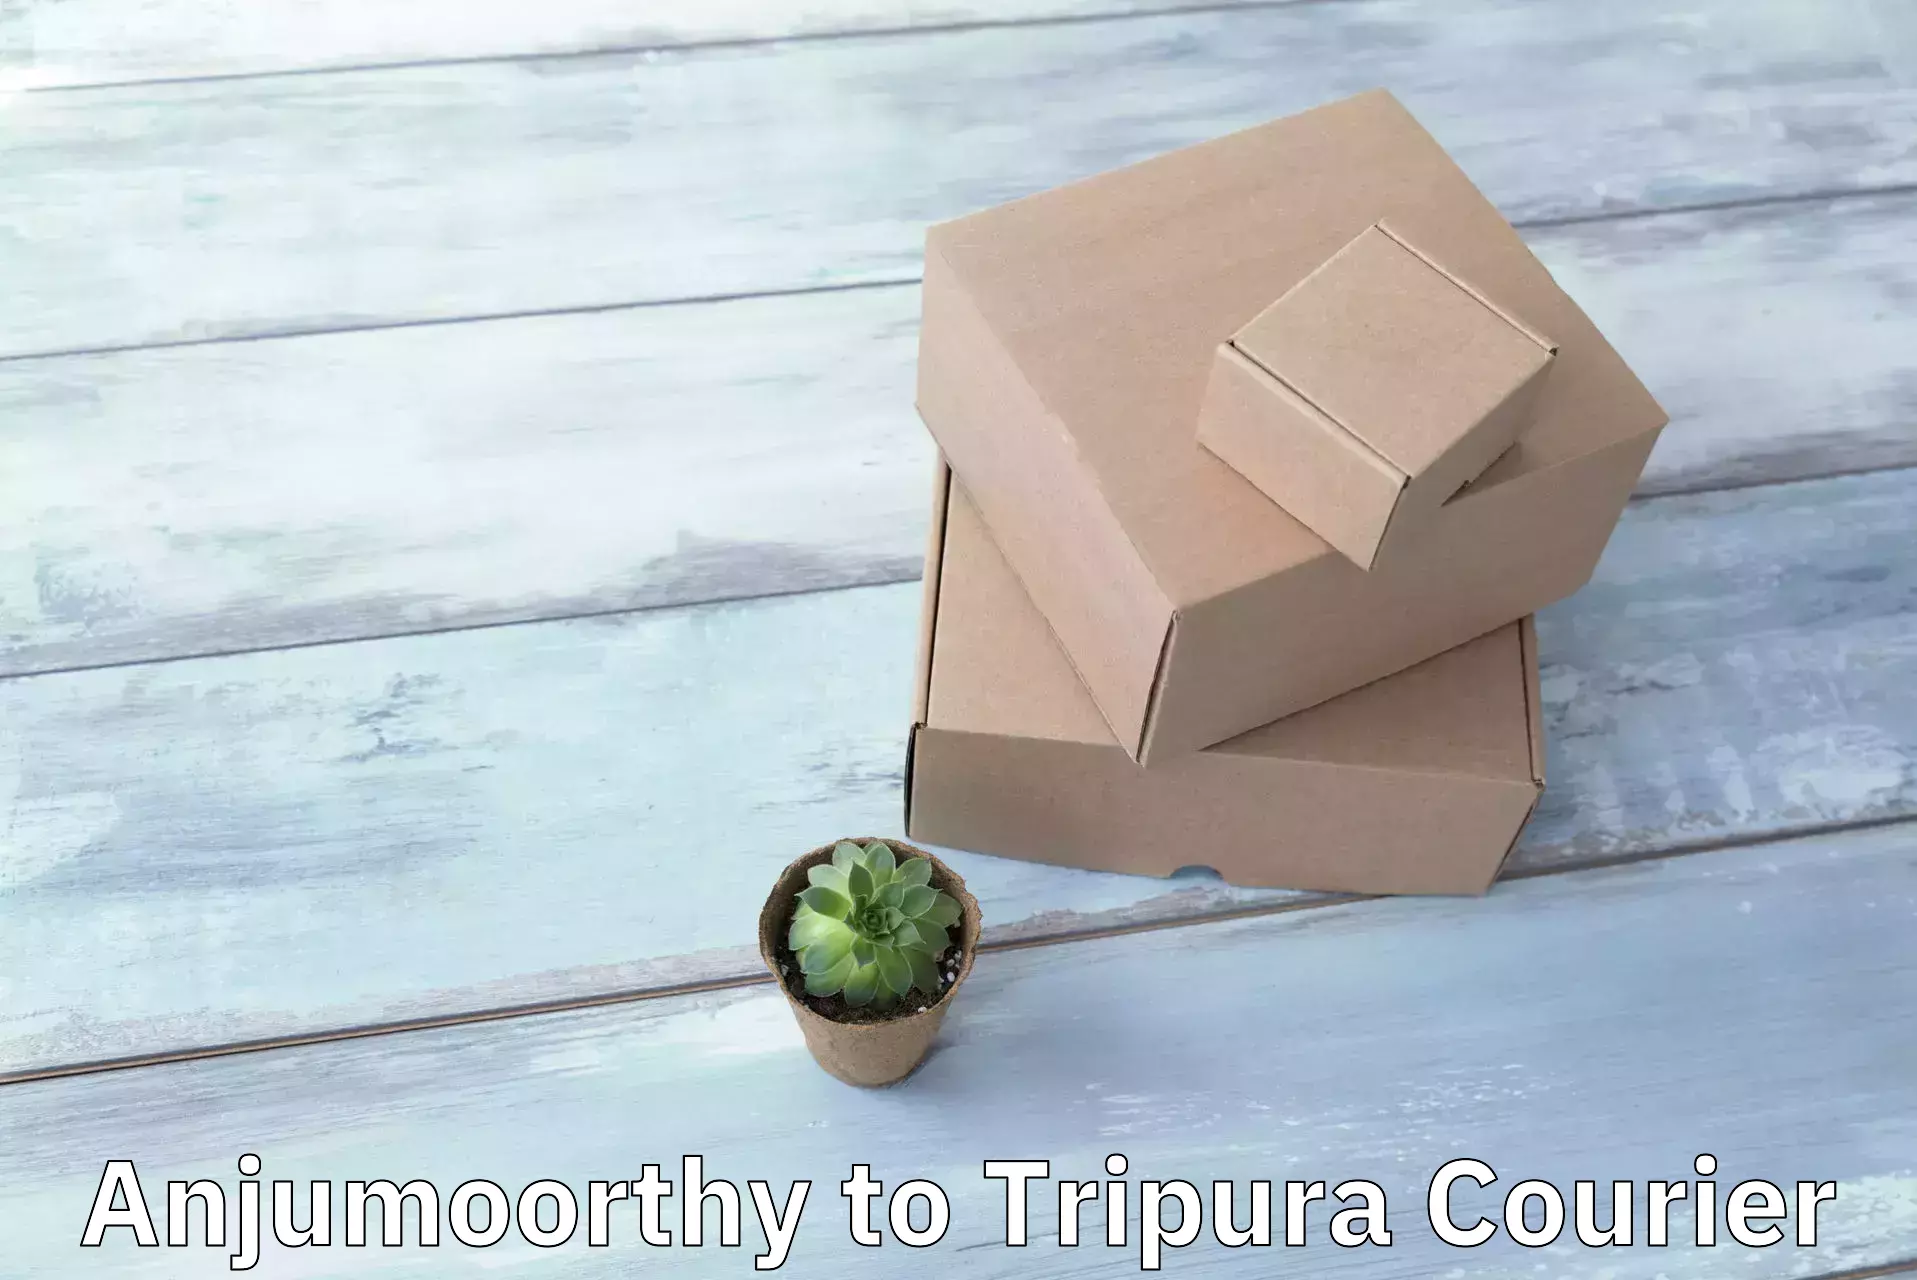 Residential courier service Anjumoorthy to Udaipur Tripura